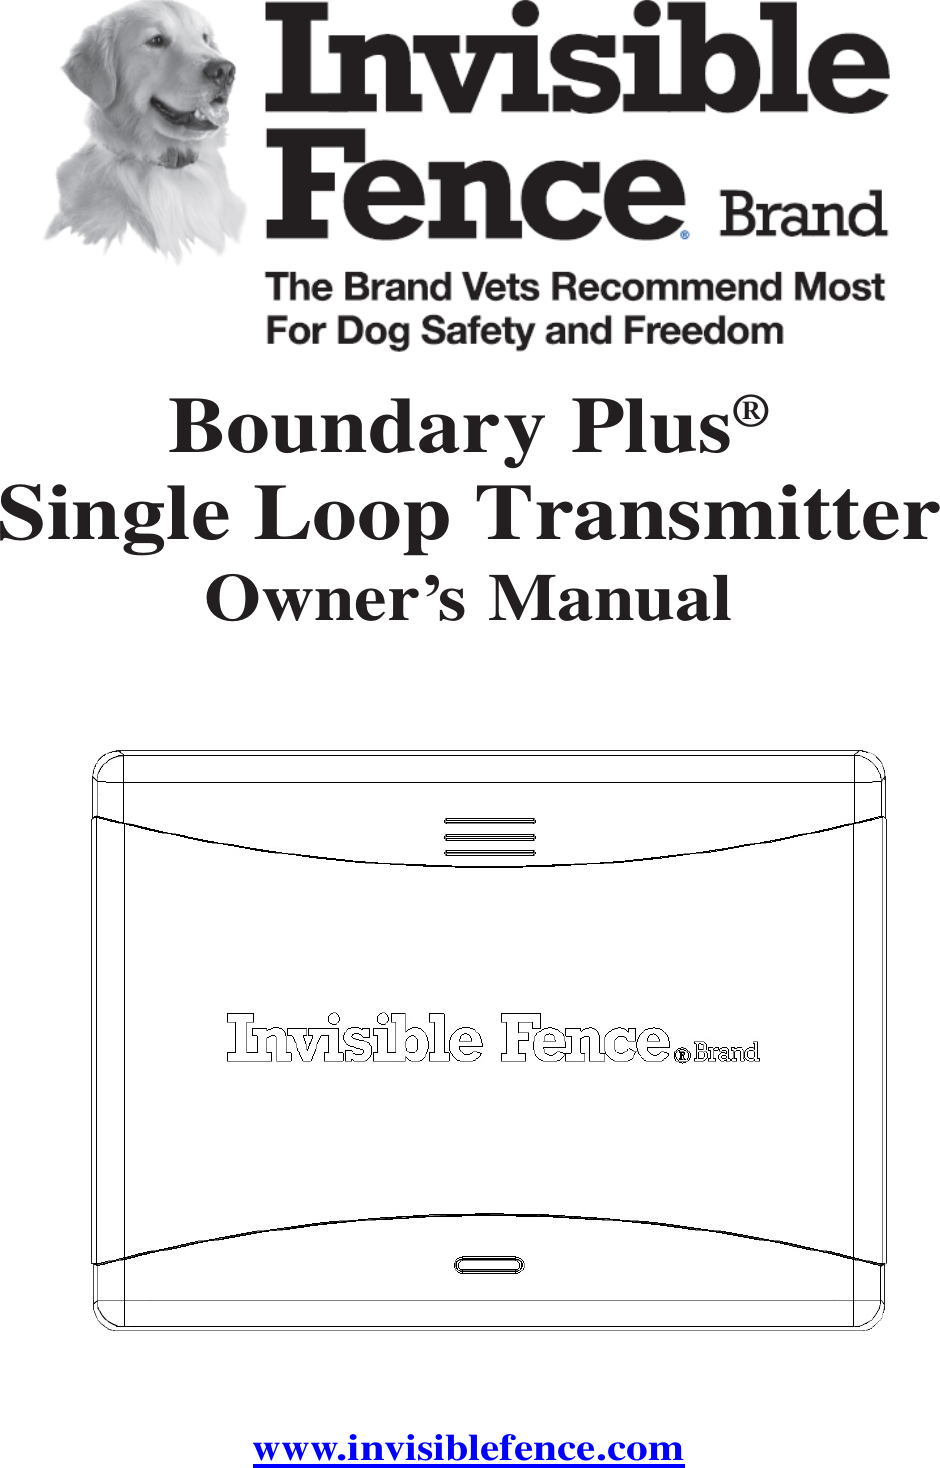           Boundary Plus® Single Loop Transmitter Owner’s Manual                             www.invisiblefence.com 